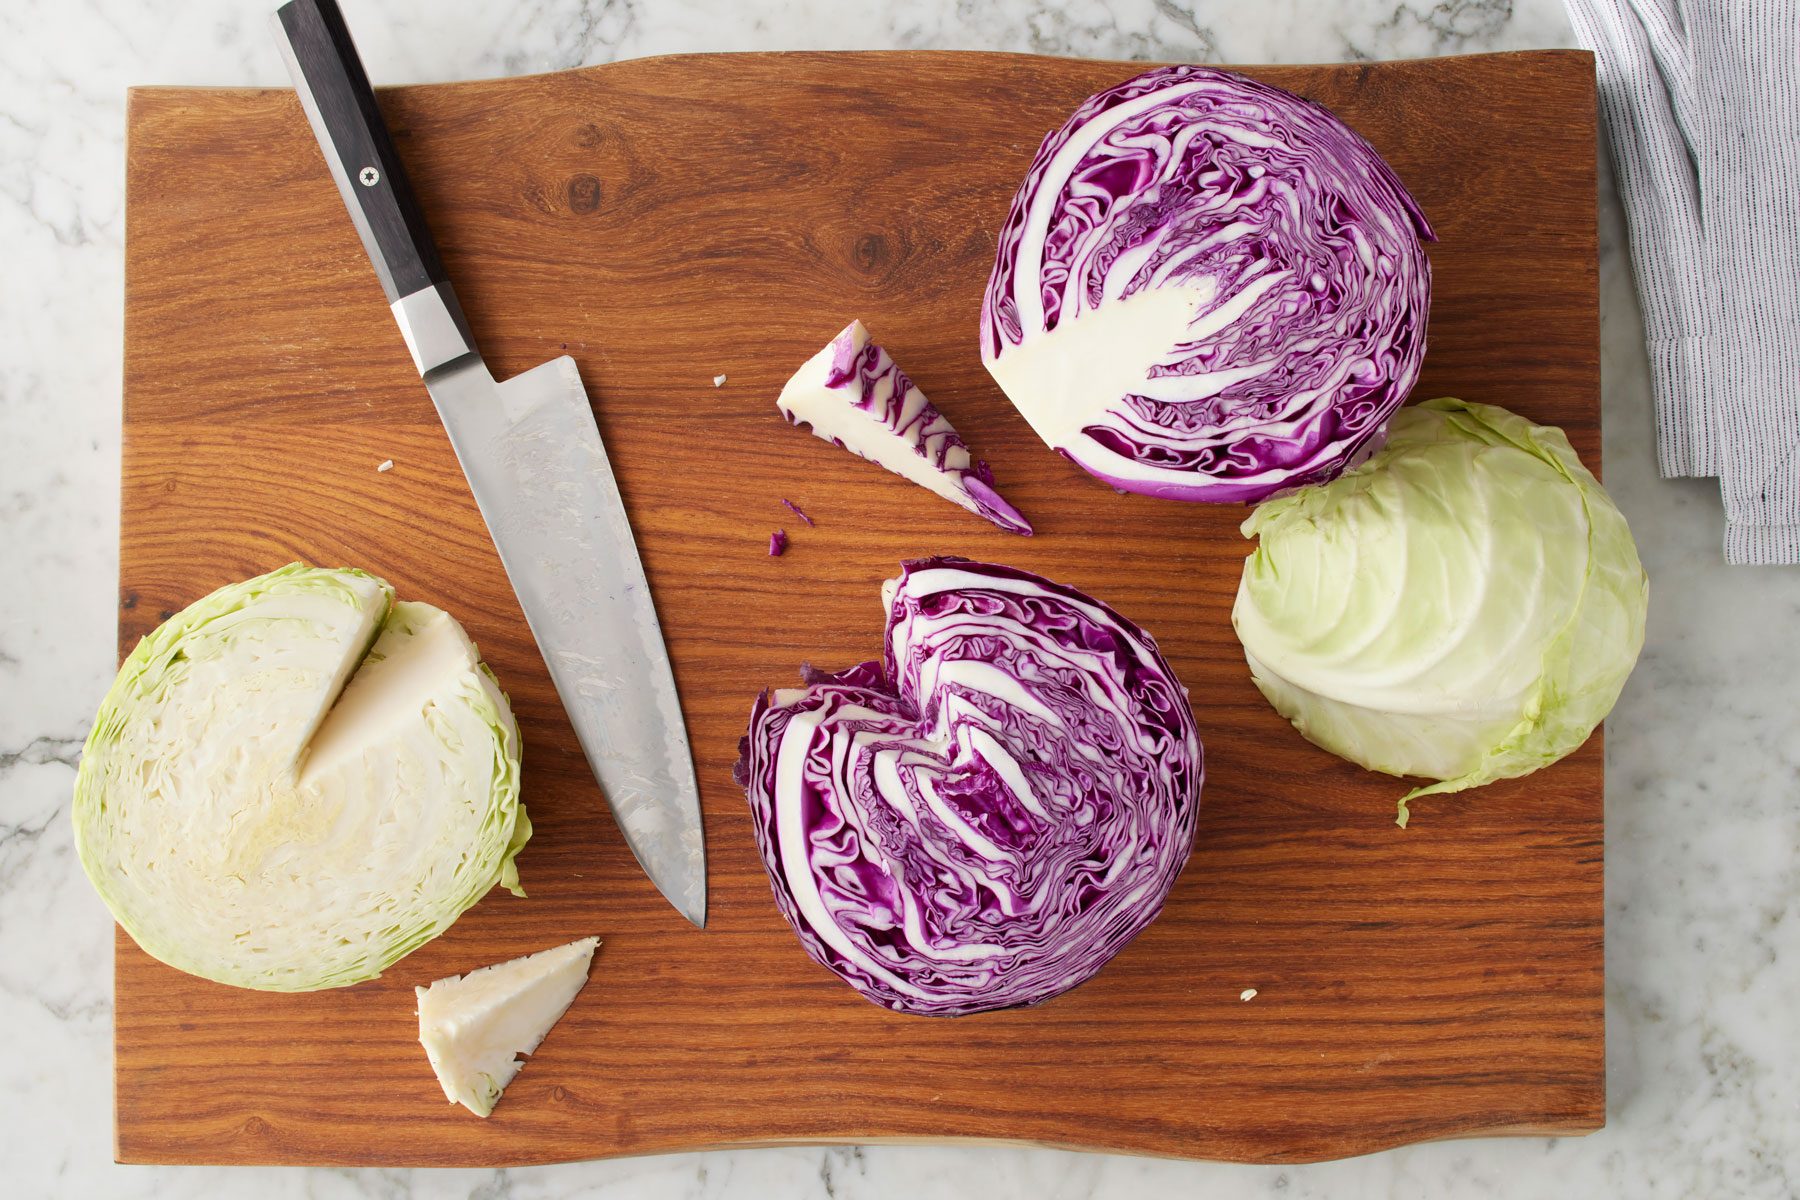 https://www.tasteofhome.com/wp-content/uploads/2019/04/How-to-Shred-Cabbage-TOHPL23_PU6186-_DR_03_02_09-prep-the-cabbage.jpg?fit=680%2C454